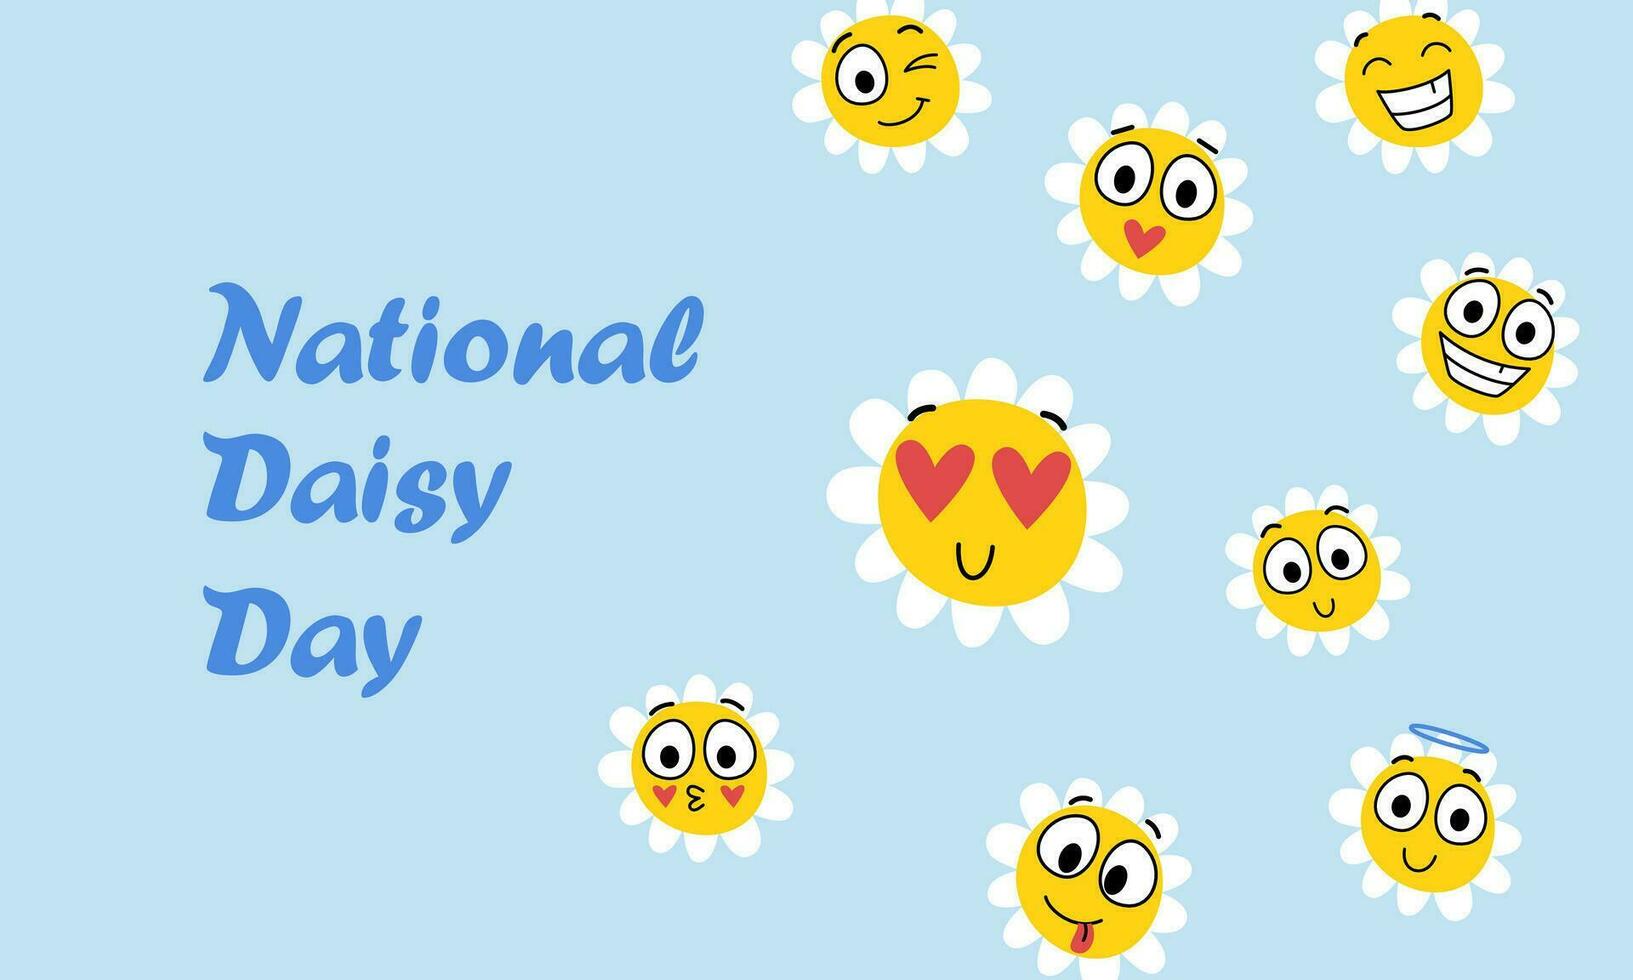 National Daisy Day banner. Cheerful and cute daisies on a blue background. Vector illustration